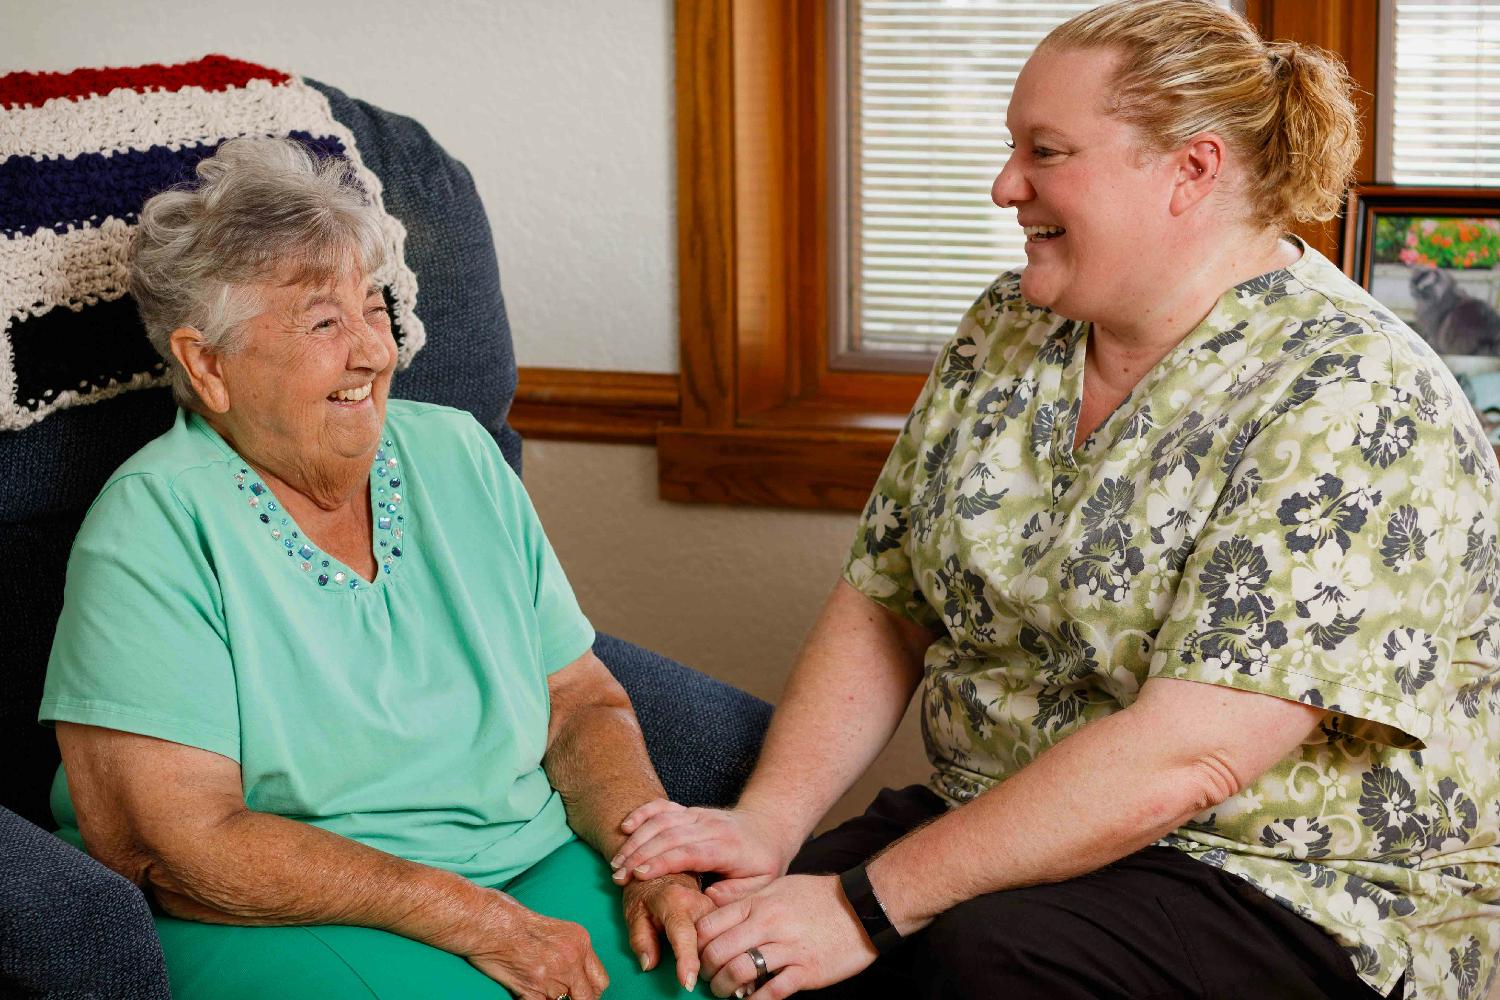 Our caregivers support our residents in many ways.